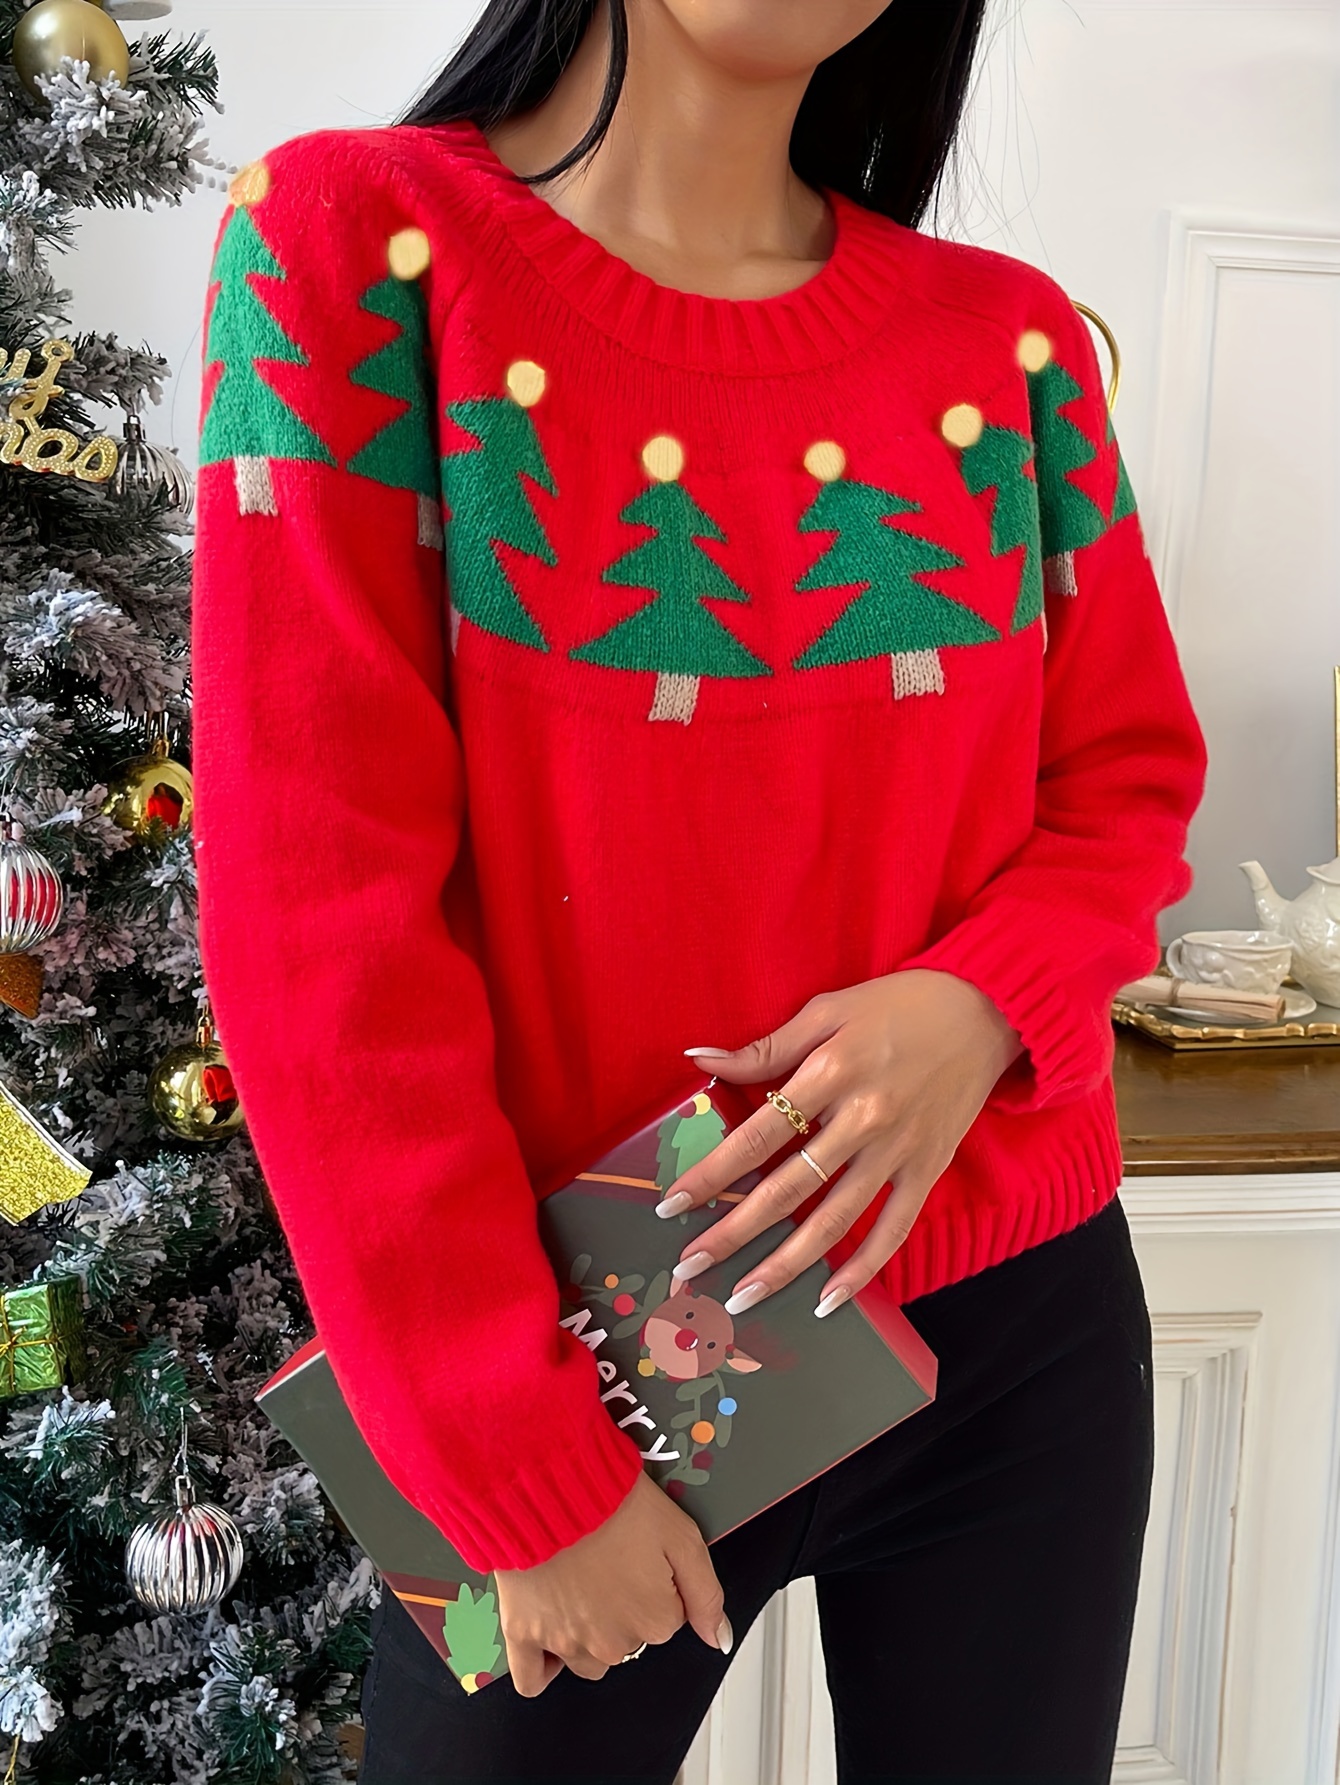 Festive Fashion: Shop Our Trendy Christmas Clothes Collection